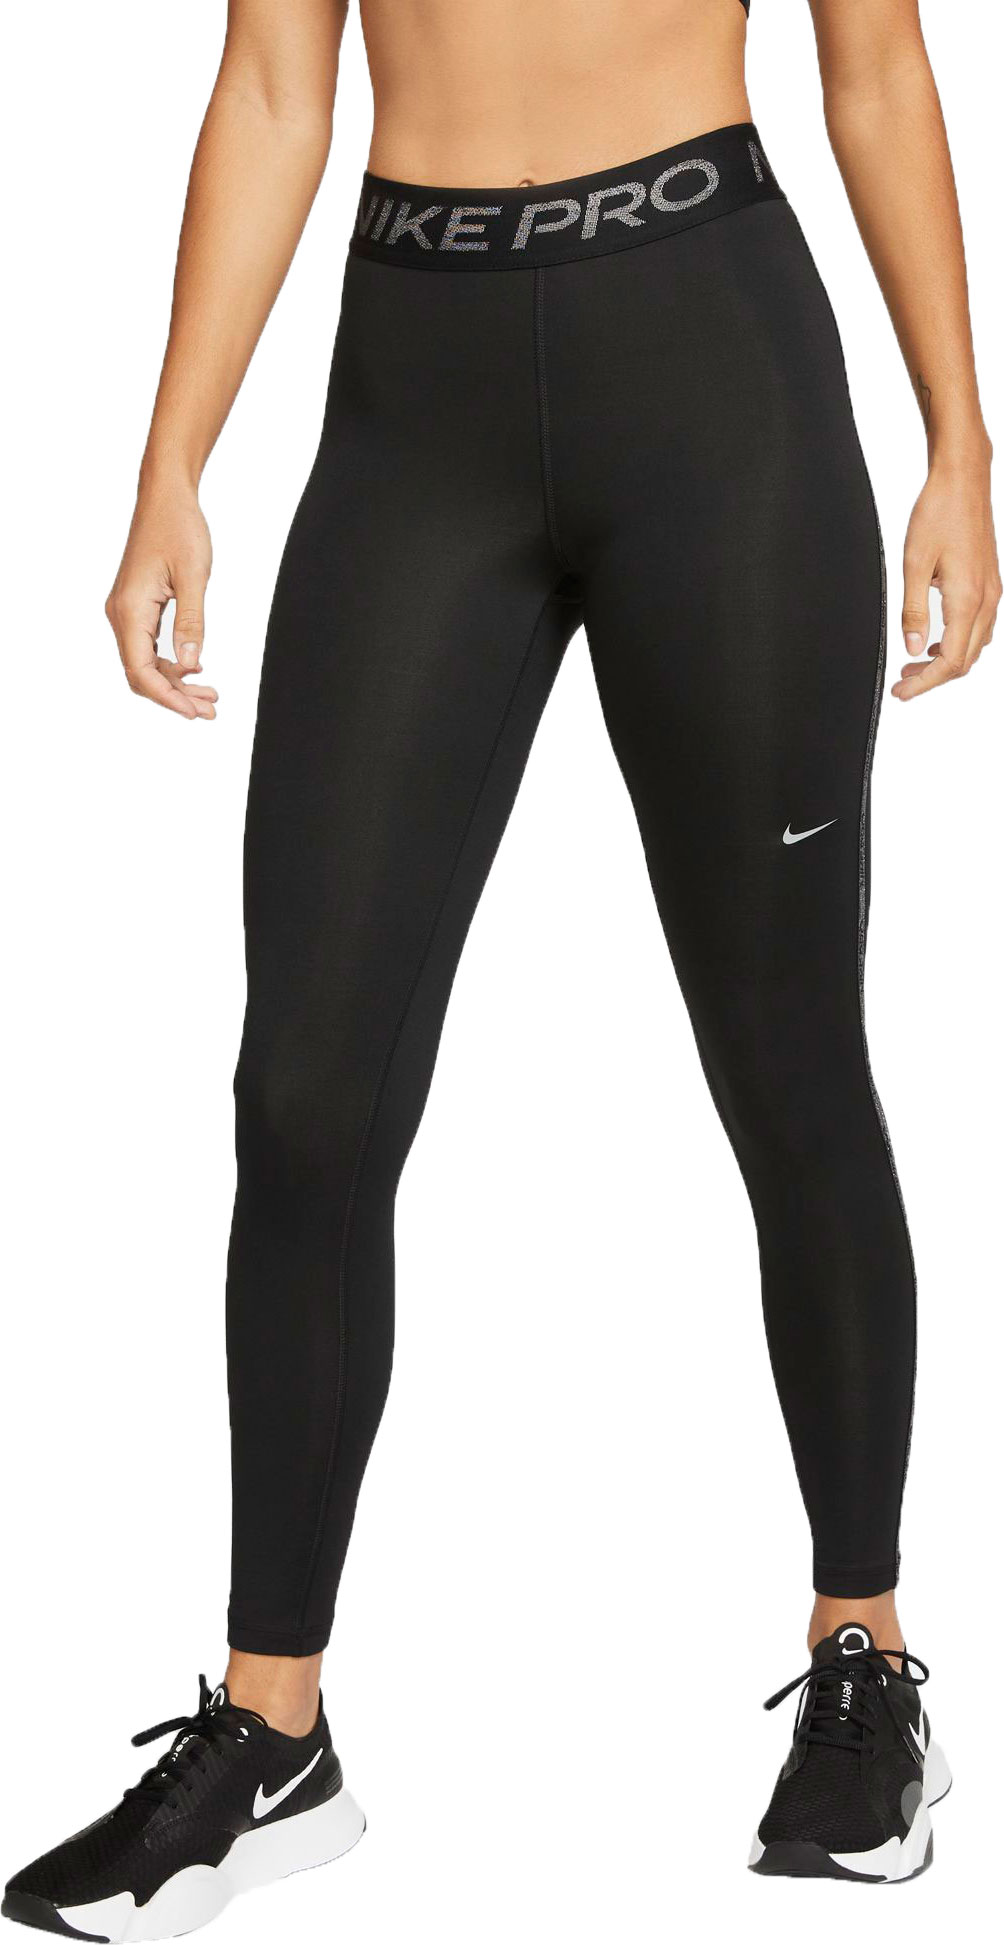 NP Men's Jogging Leisure Fitness Sports Tights